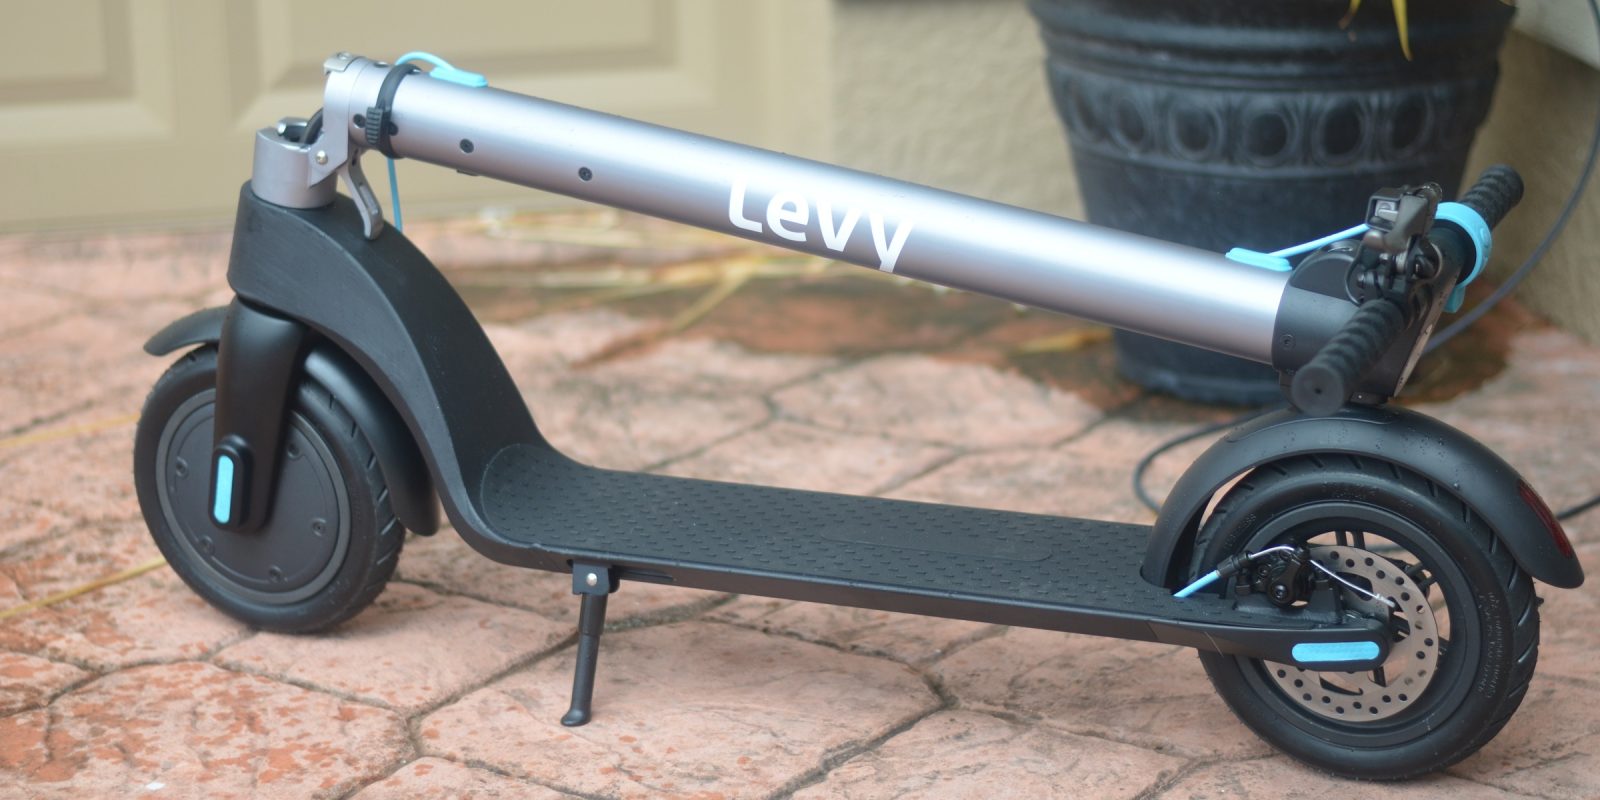 levy electric scooter